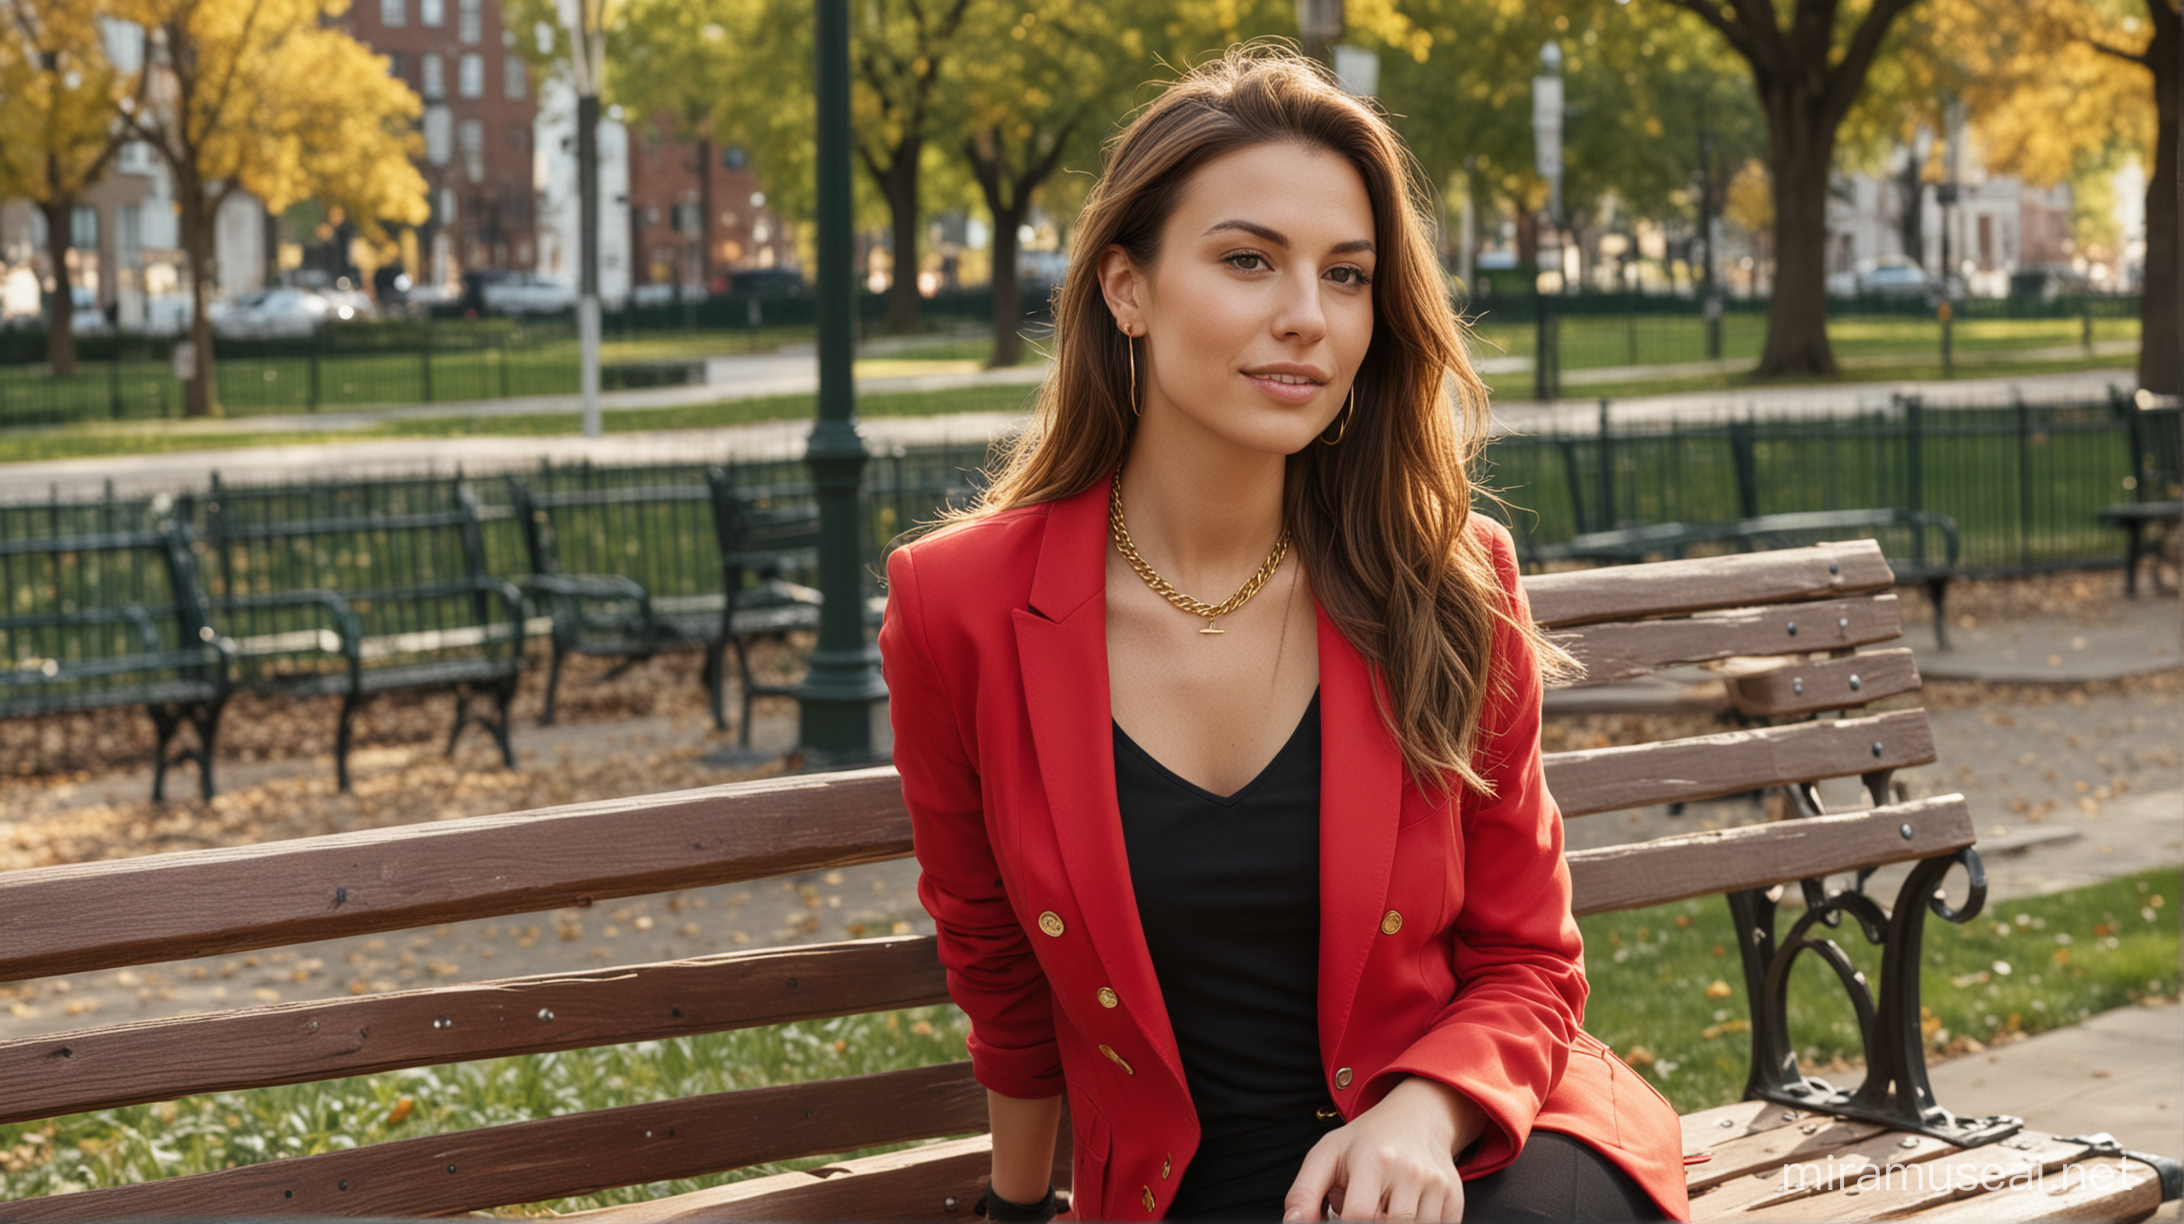 30 year old white woman sitting on a park bench in an urban park closeup. She has long brown hair parted to the right. She is wearing a red blazer, gold necklace with very low cut black shirt and black pants.